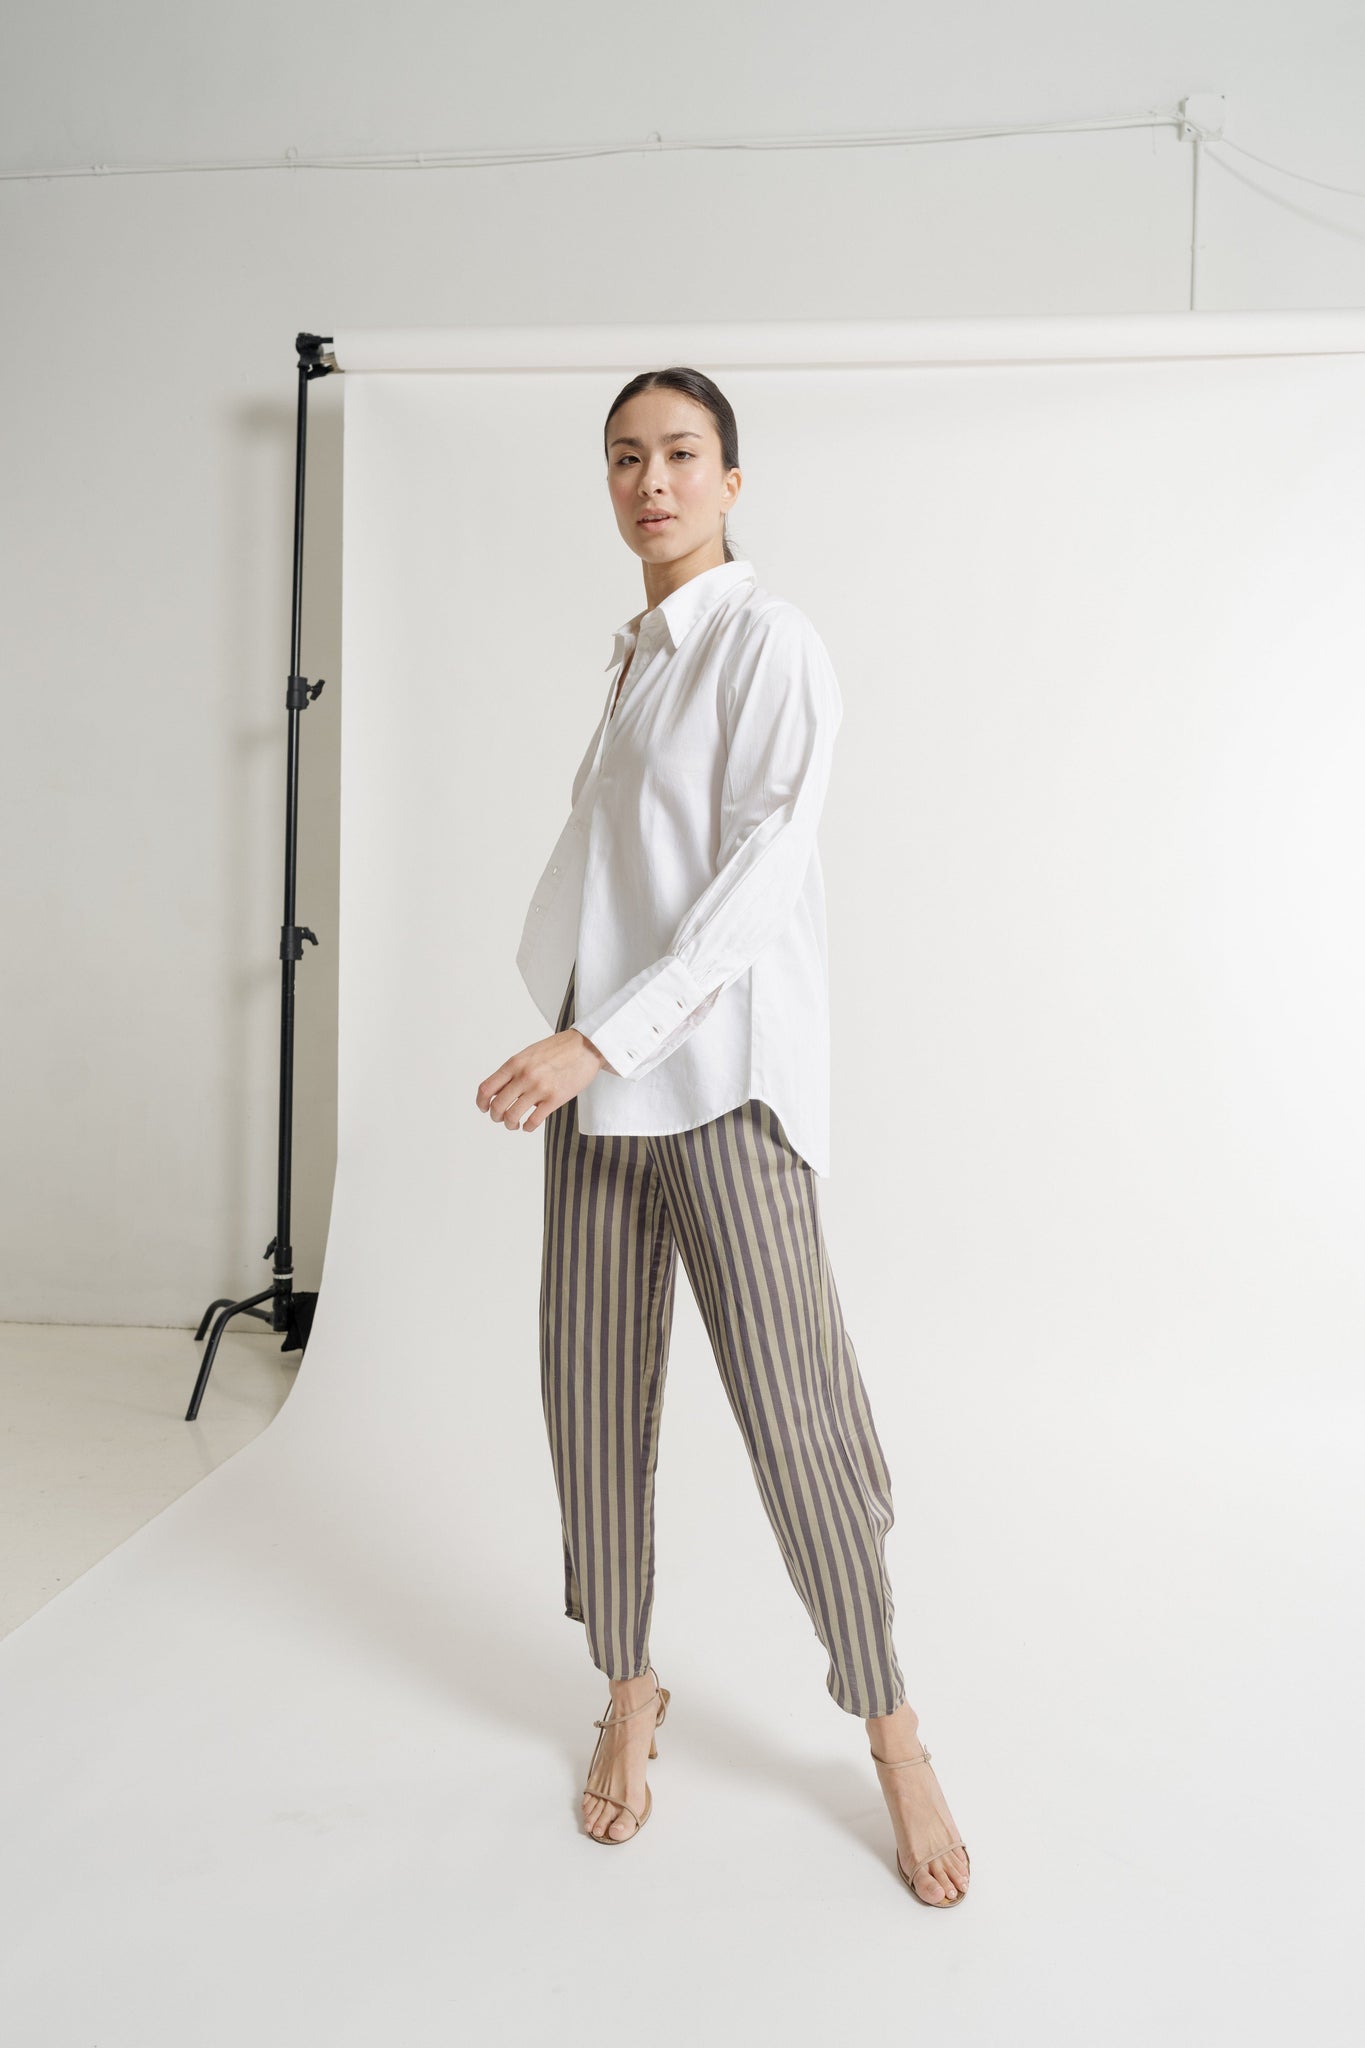 A model wearing a white shirt and the Ruffled Waist Tie Pant - Urban Stripe - Pre-order. These pants, known as the Cropped Ruffled Waist Tie Pant, are currently available for resort pre-orders.